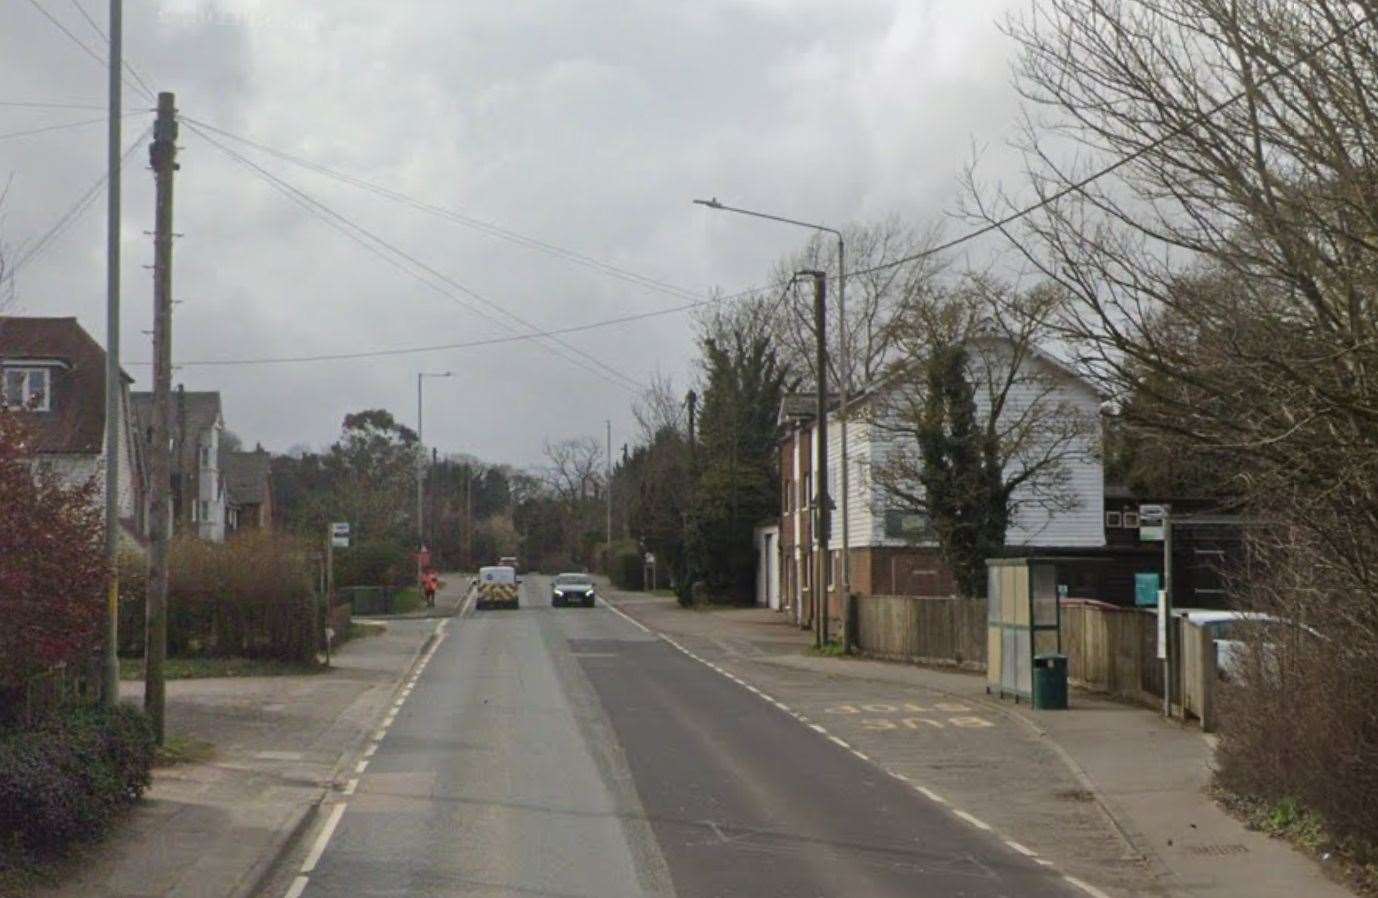 A25 Maidstone Road in St Mary's Platt is shut for emergency tree works. Picture: Google